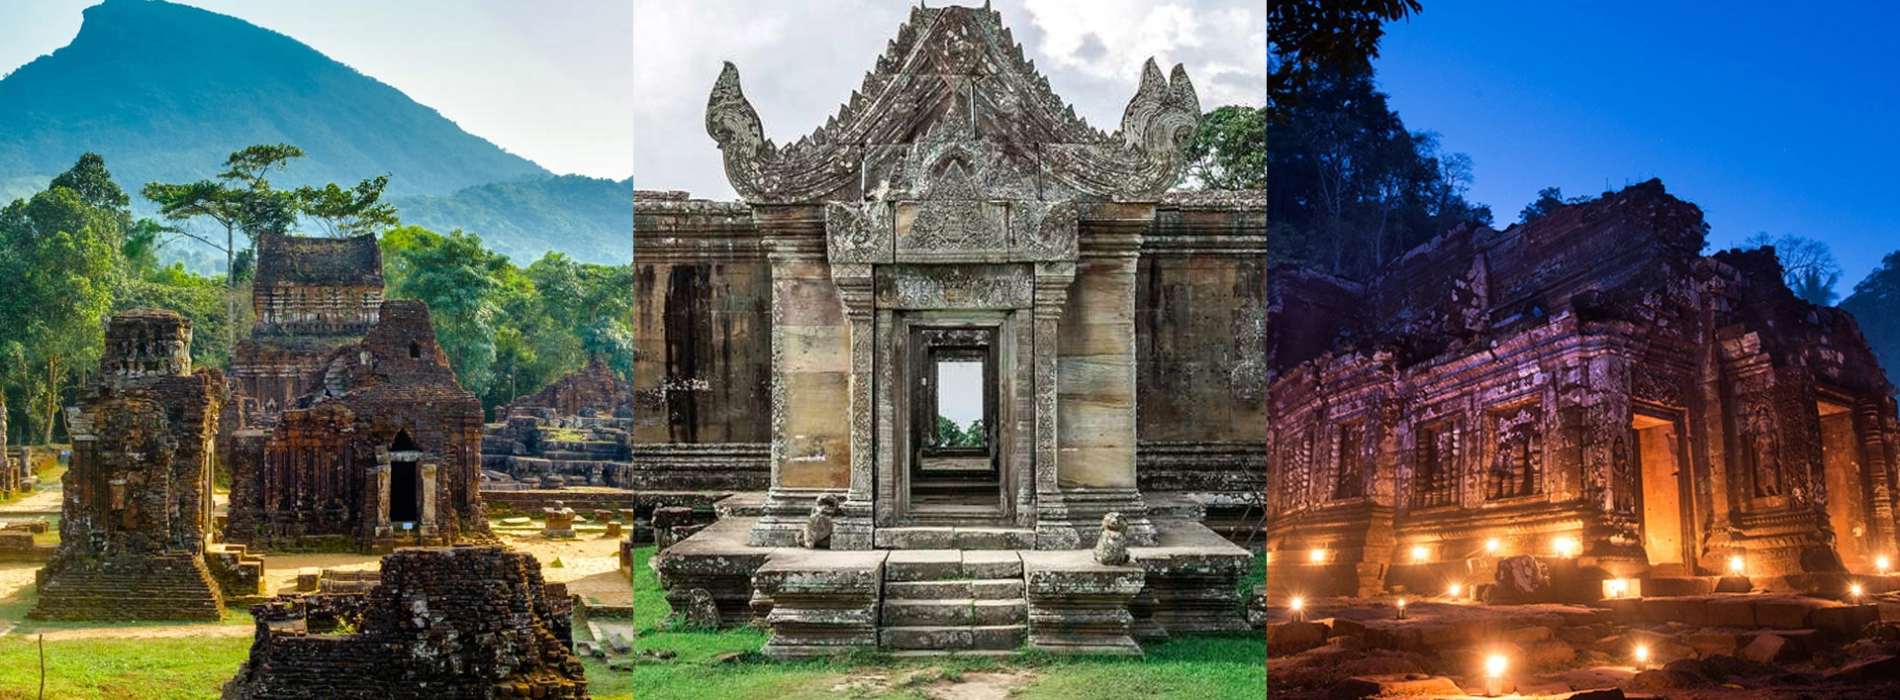 The ancient beauty of historical sites in Vietnam, Laos, and Cambodia